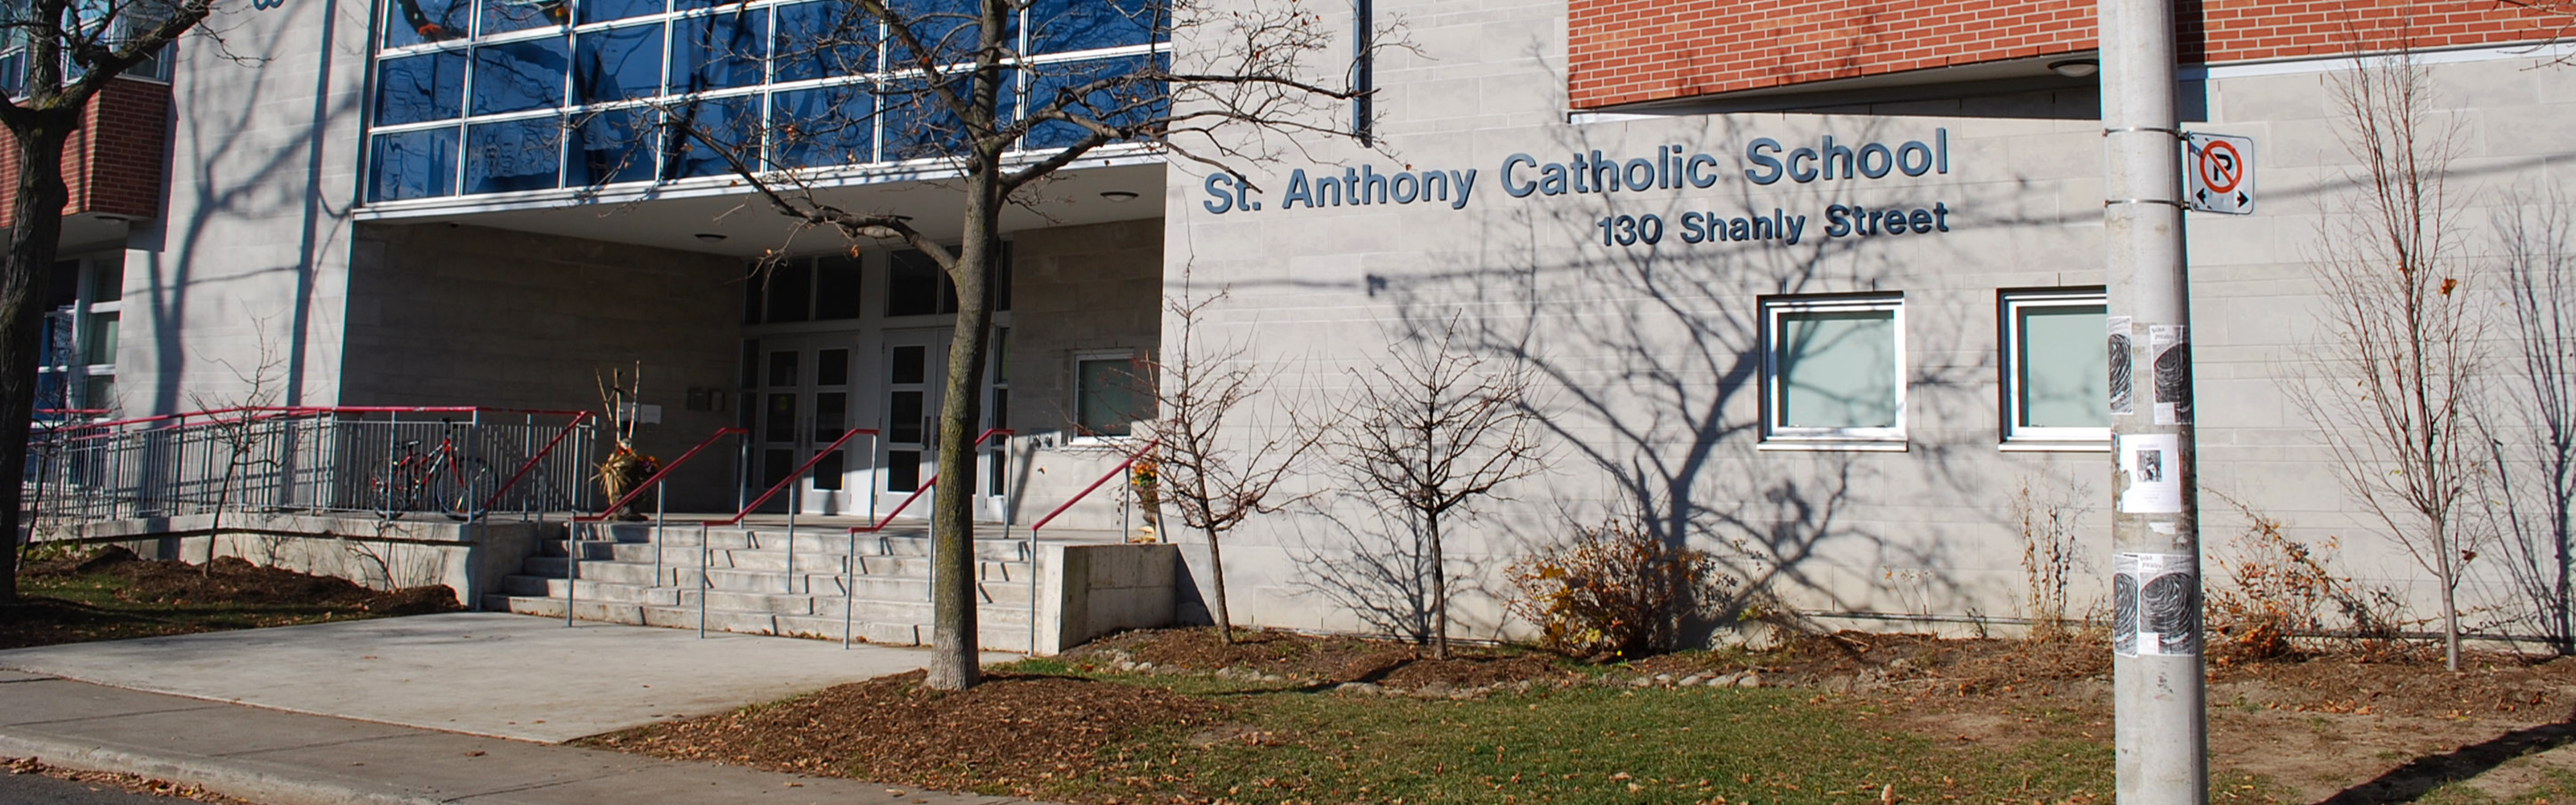 The front of the St. Anthony Catholic School building.